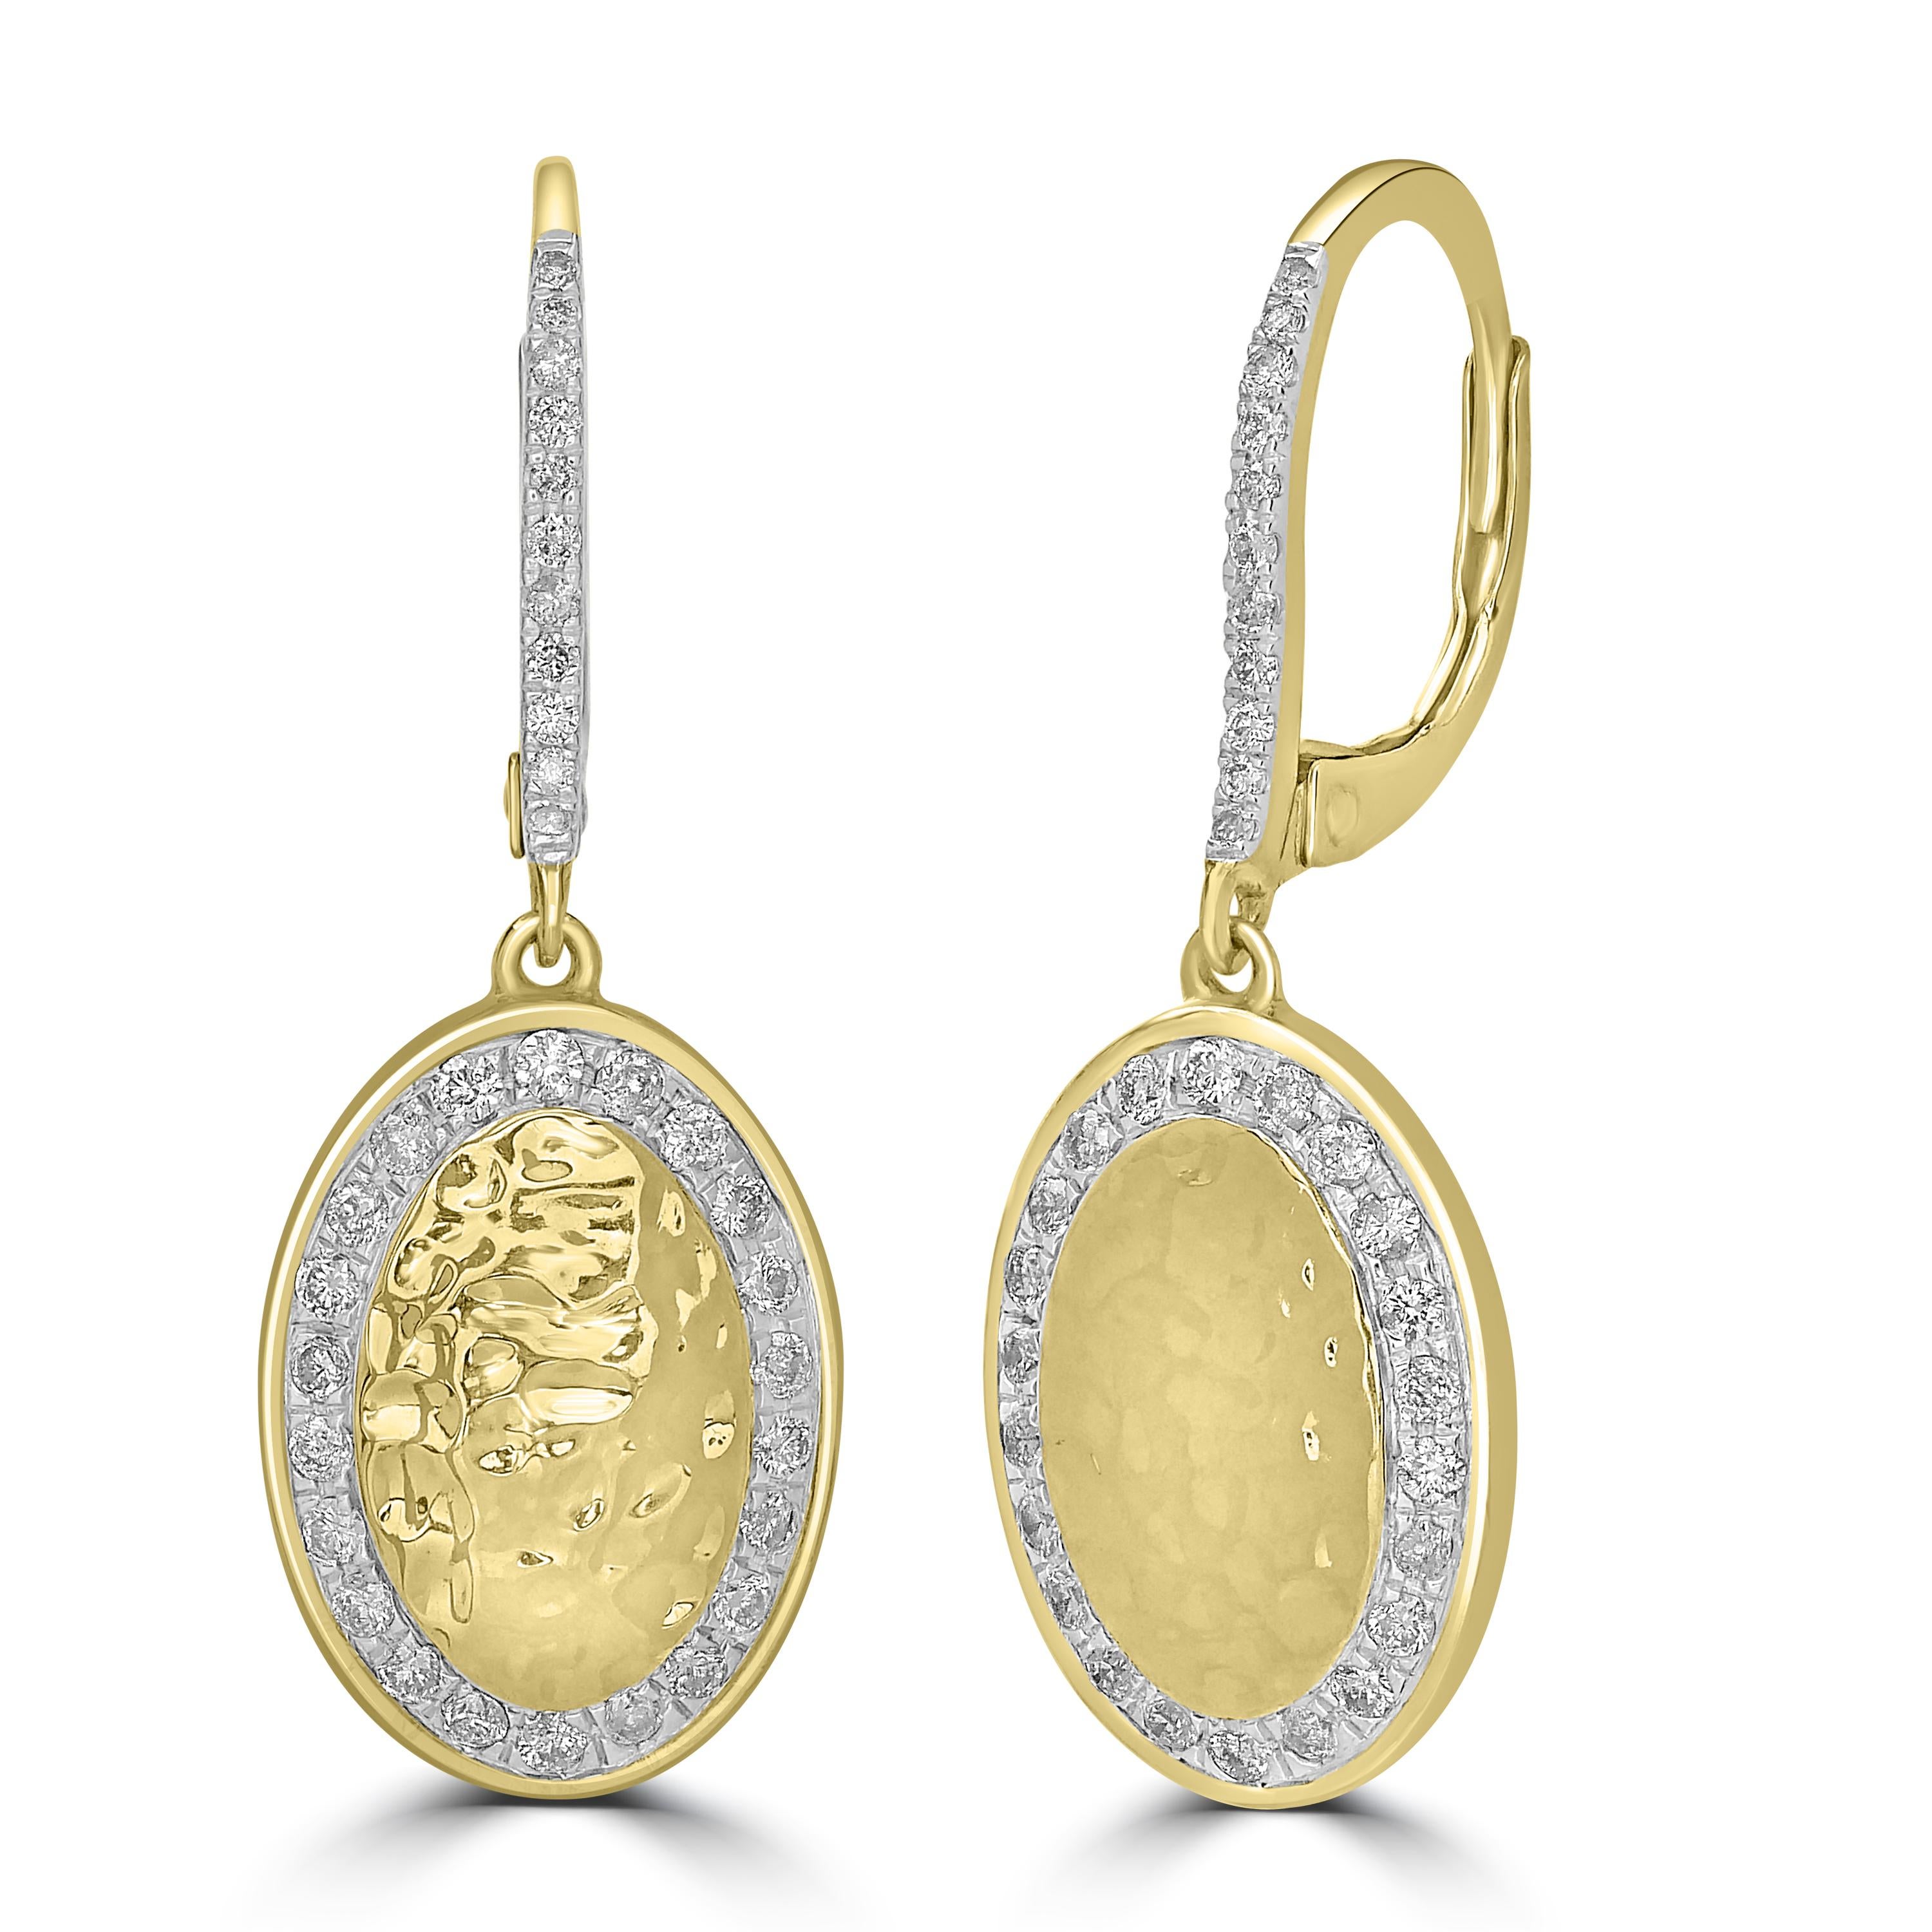 Round full-cut White Diamonds in a micro pave setting adorn this oval-shaped dangle earring with lever back style. The diamonds are I1 in clarity and GH in color, weighing 0.46 Cts. This 14K Yellow-White Gold ring is a classic example of simplicity